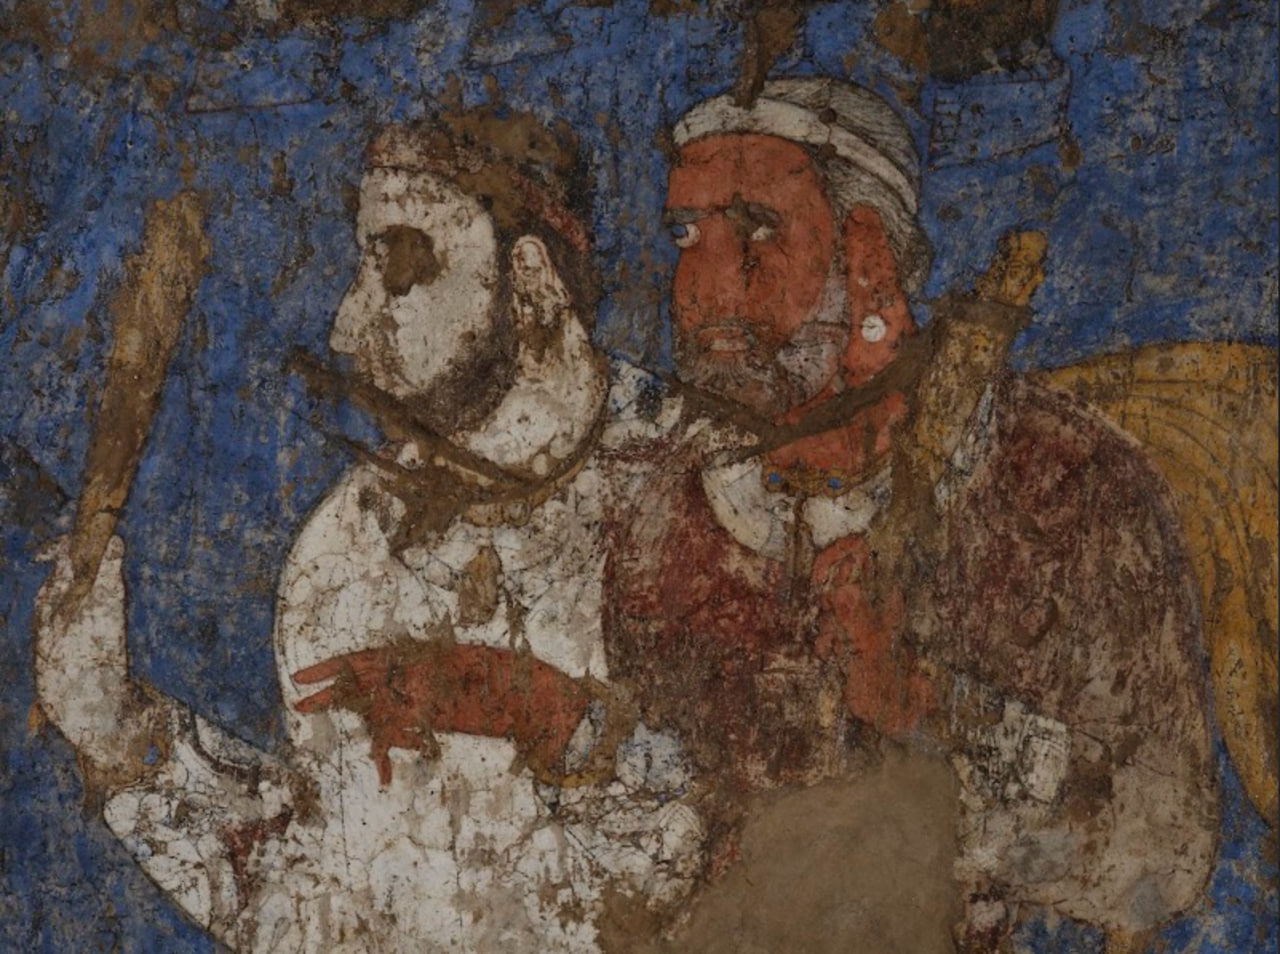 Ground-breaking new exhibition explores the Silk Roads and the epic journeys of the people, objects and ideas which shaped cultures and histories